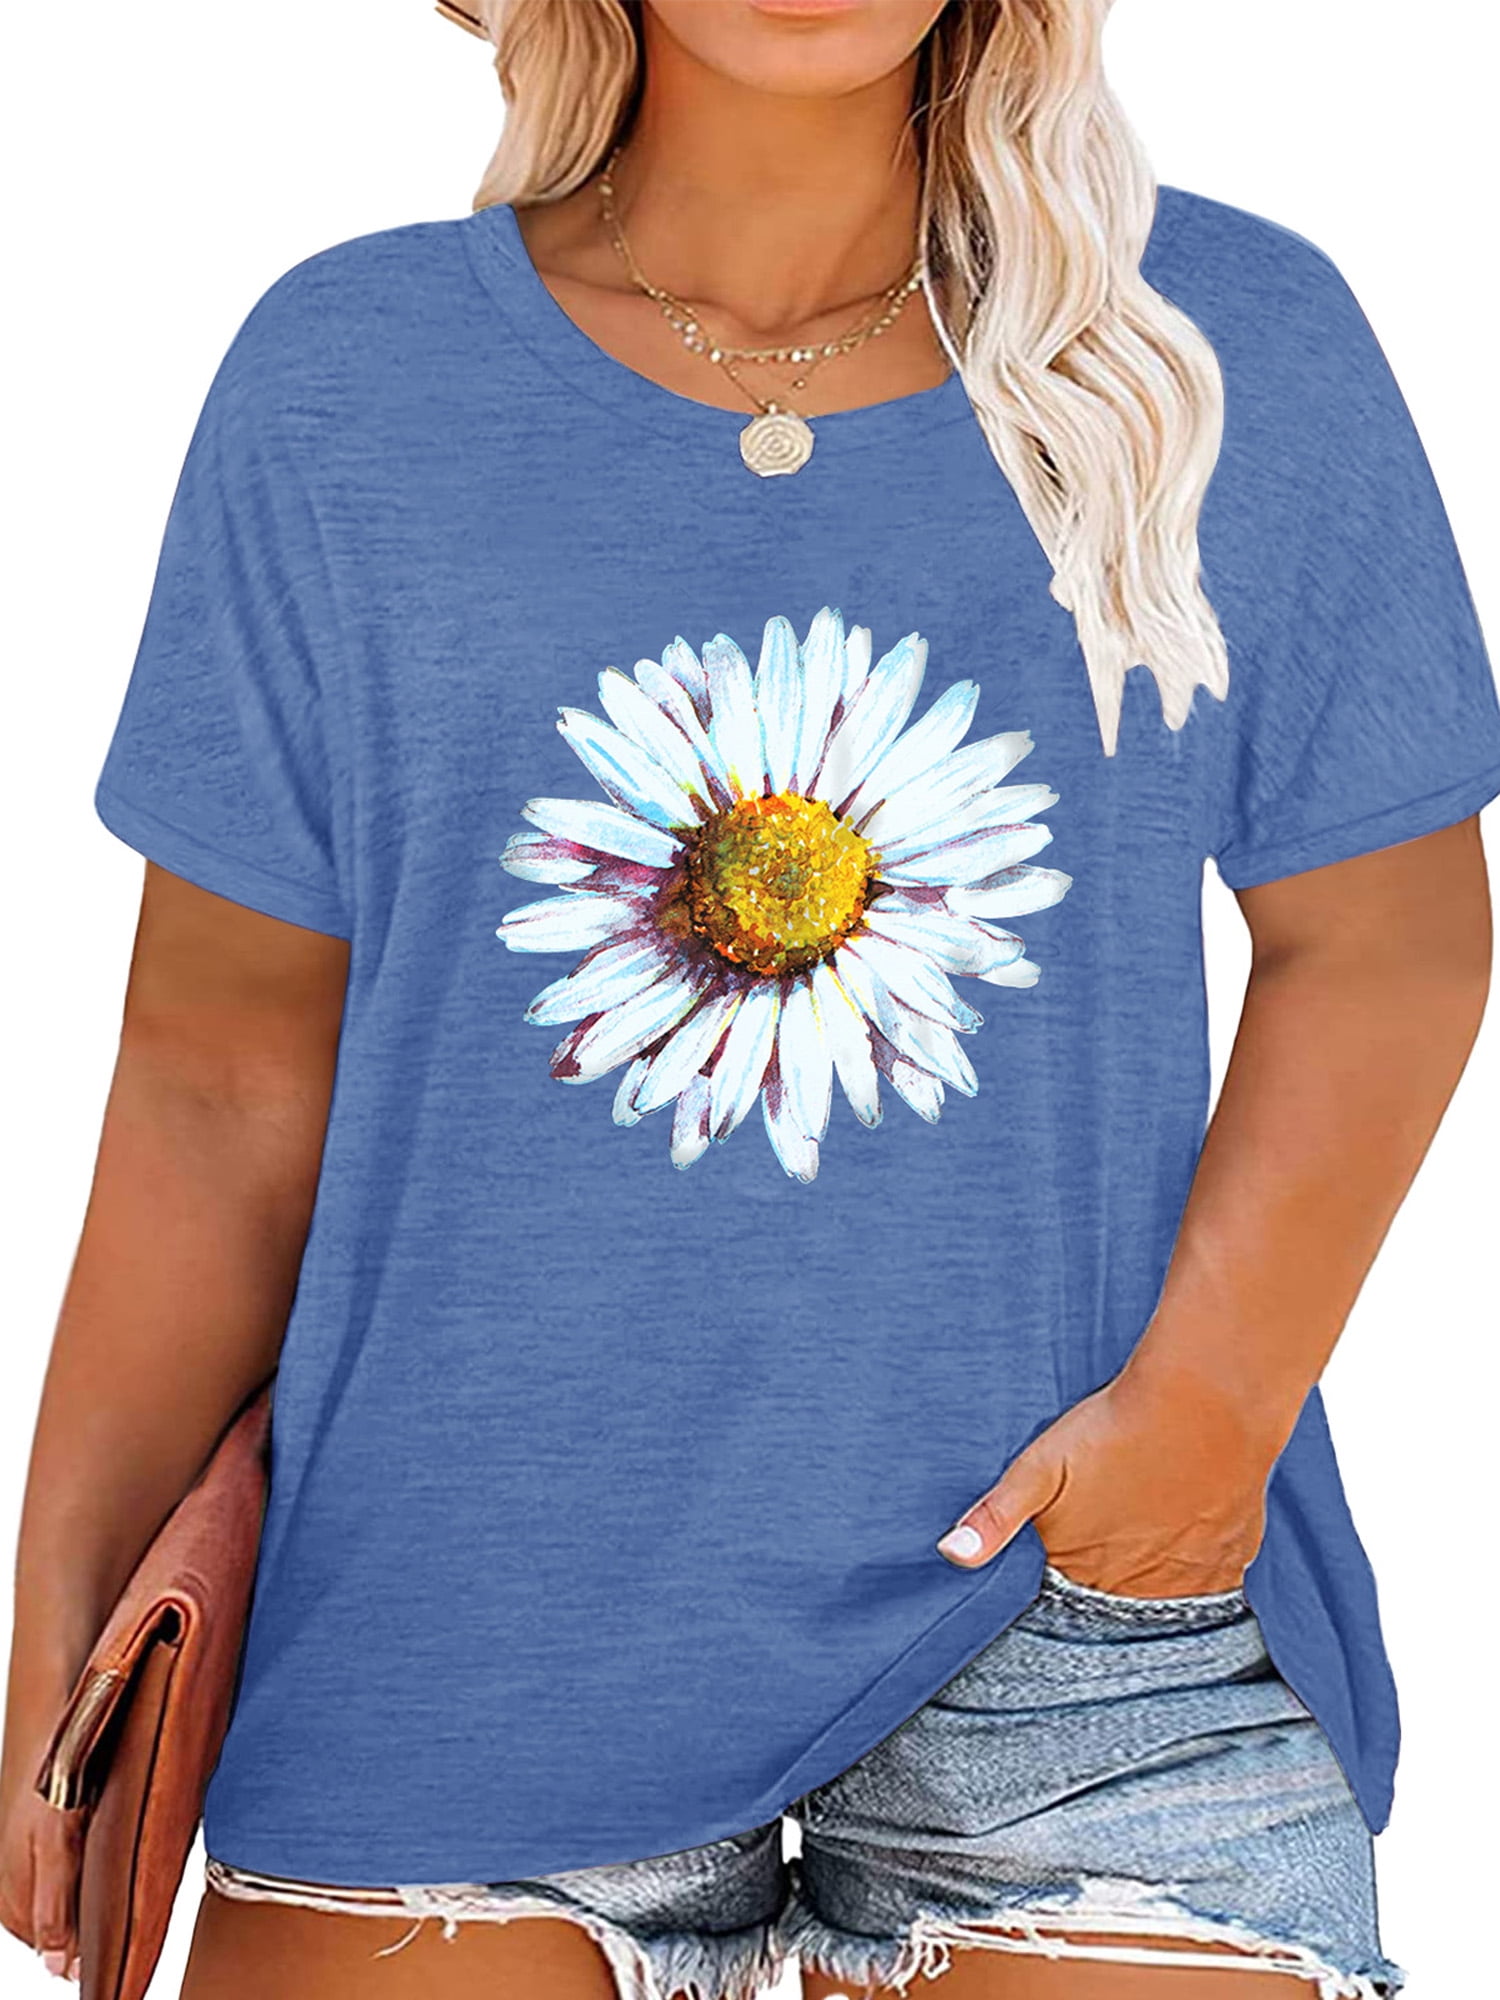 Anbech Plus Size Daisy Shirt Oversized Graphic Tees for Women Plus ...